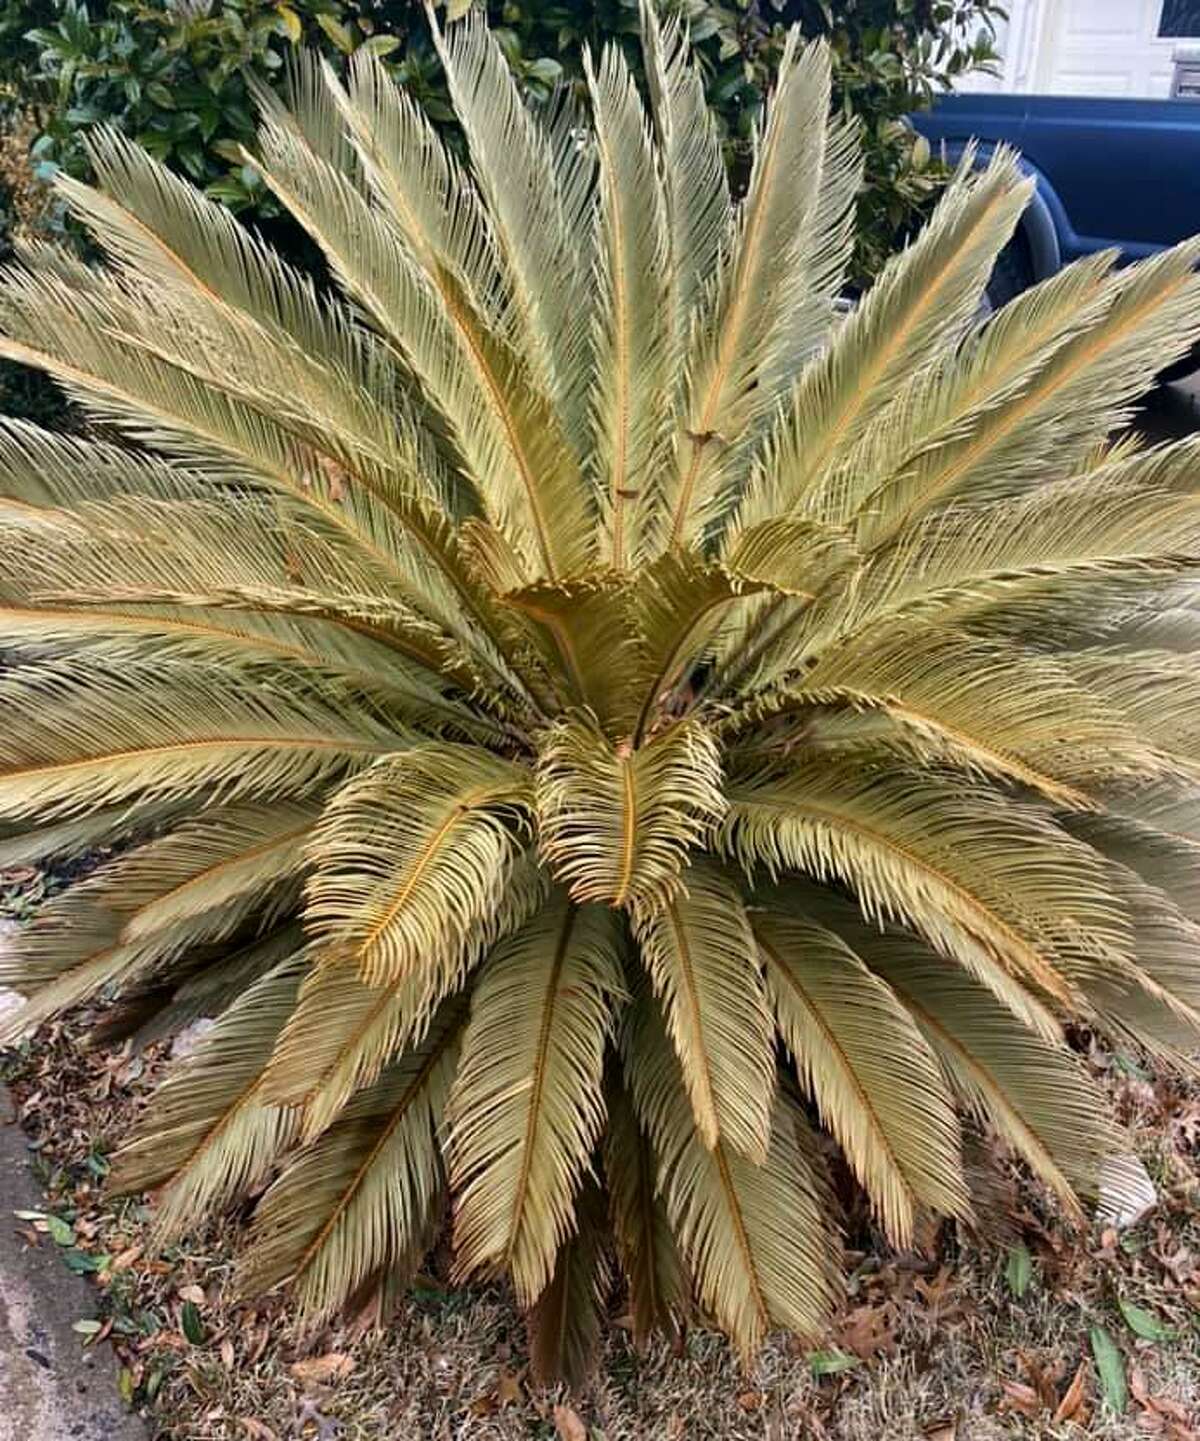 What to do with freeze-damages sago palms? Wait. The browned leaves won’t green up again, but your hope is that new green leaves will emerge from the centers of the plants.